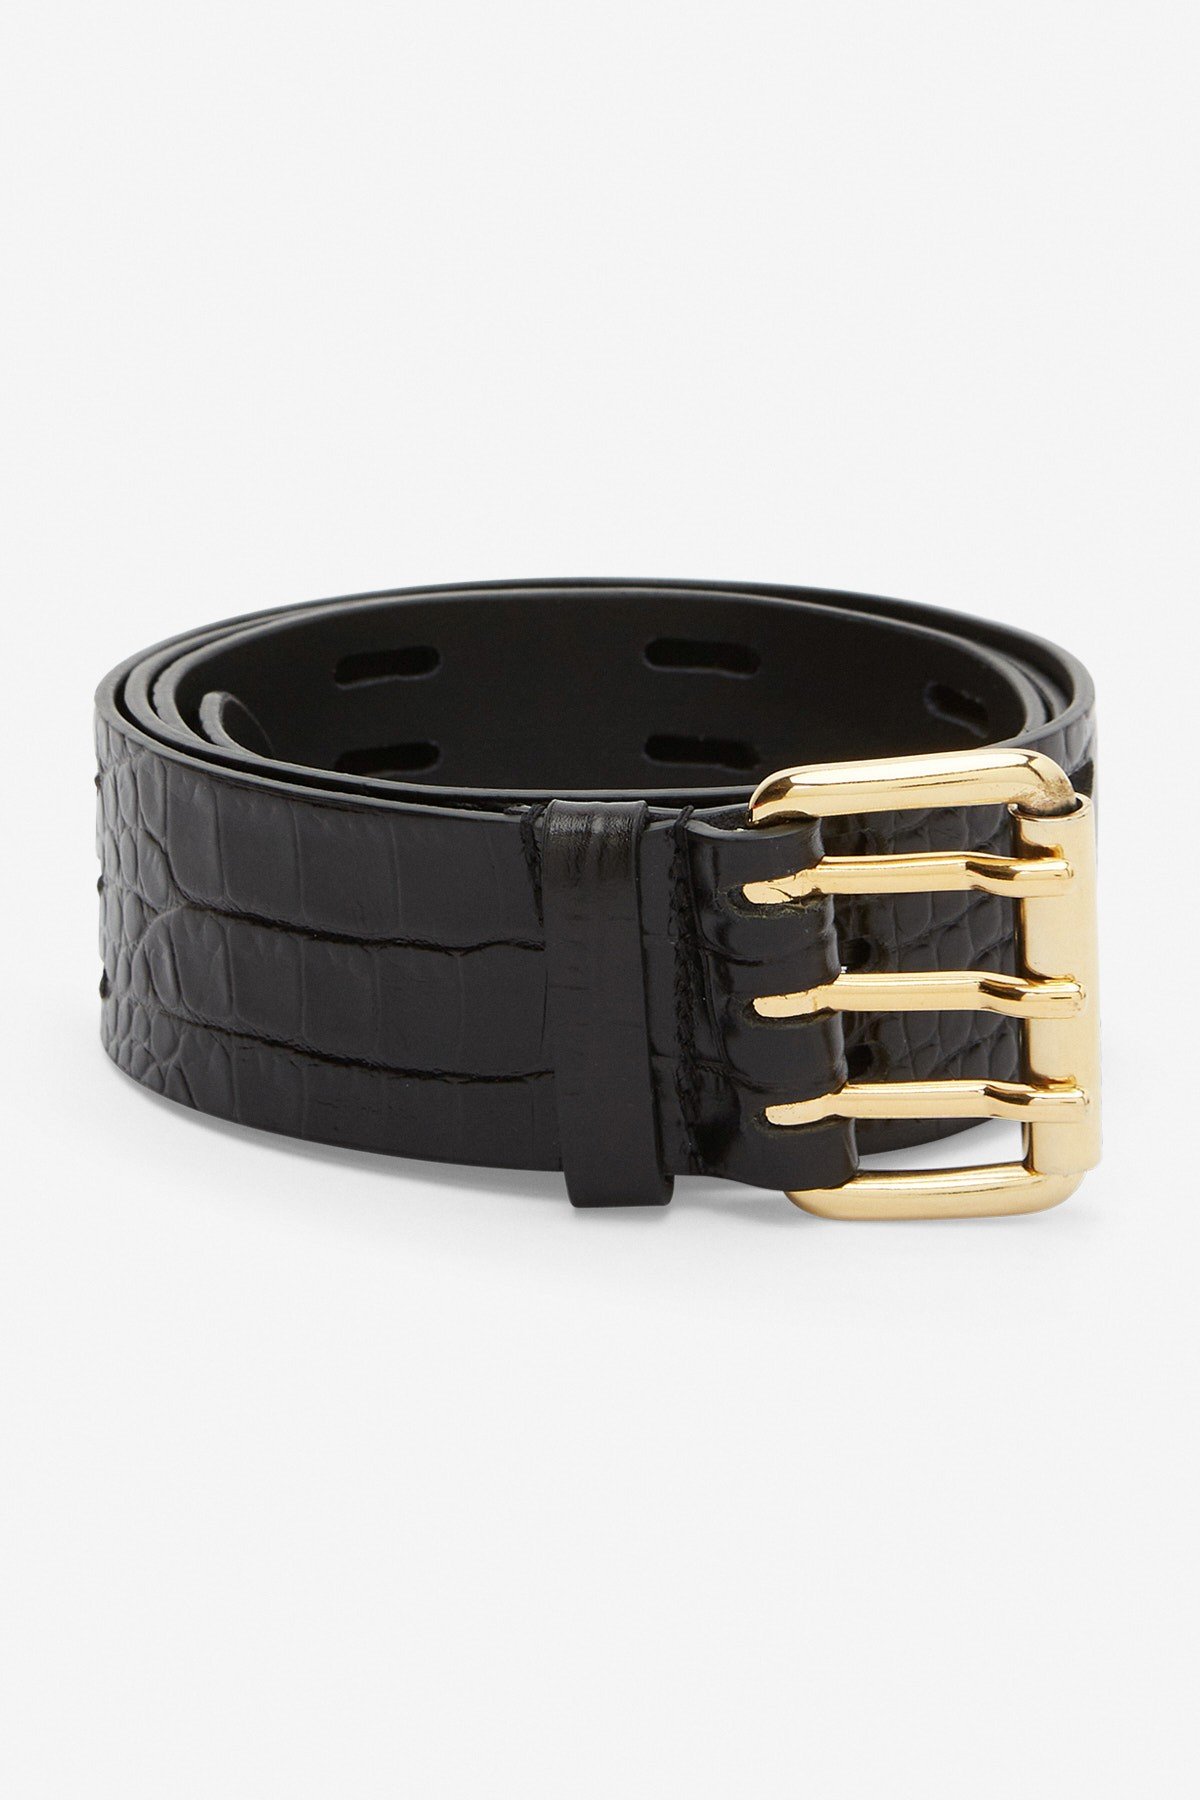 Pierced and thin leather belt